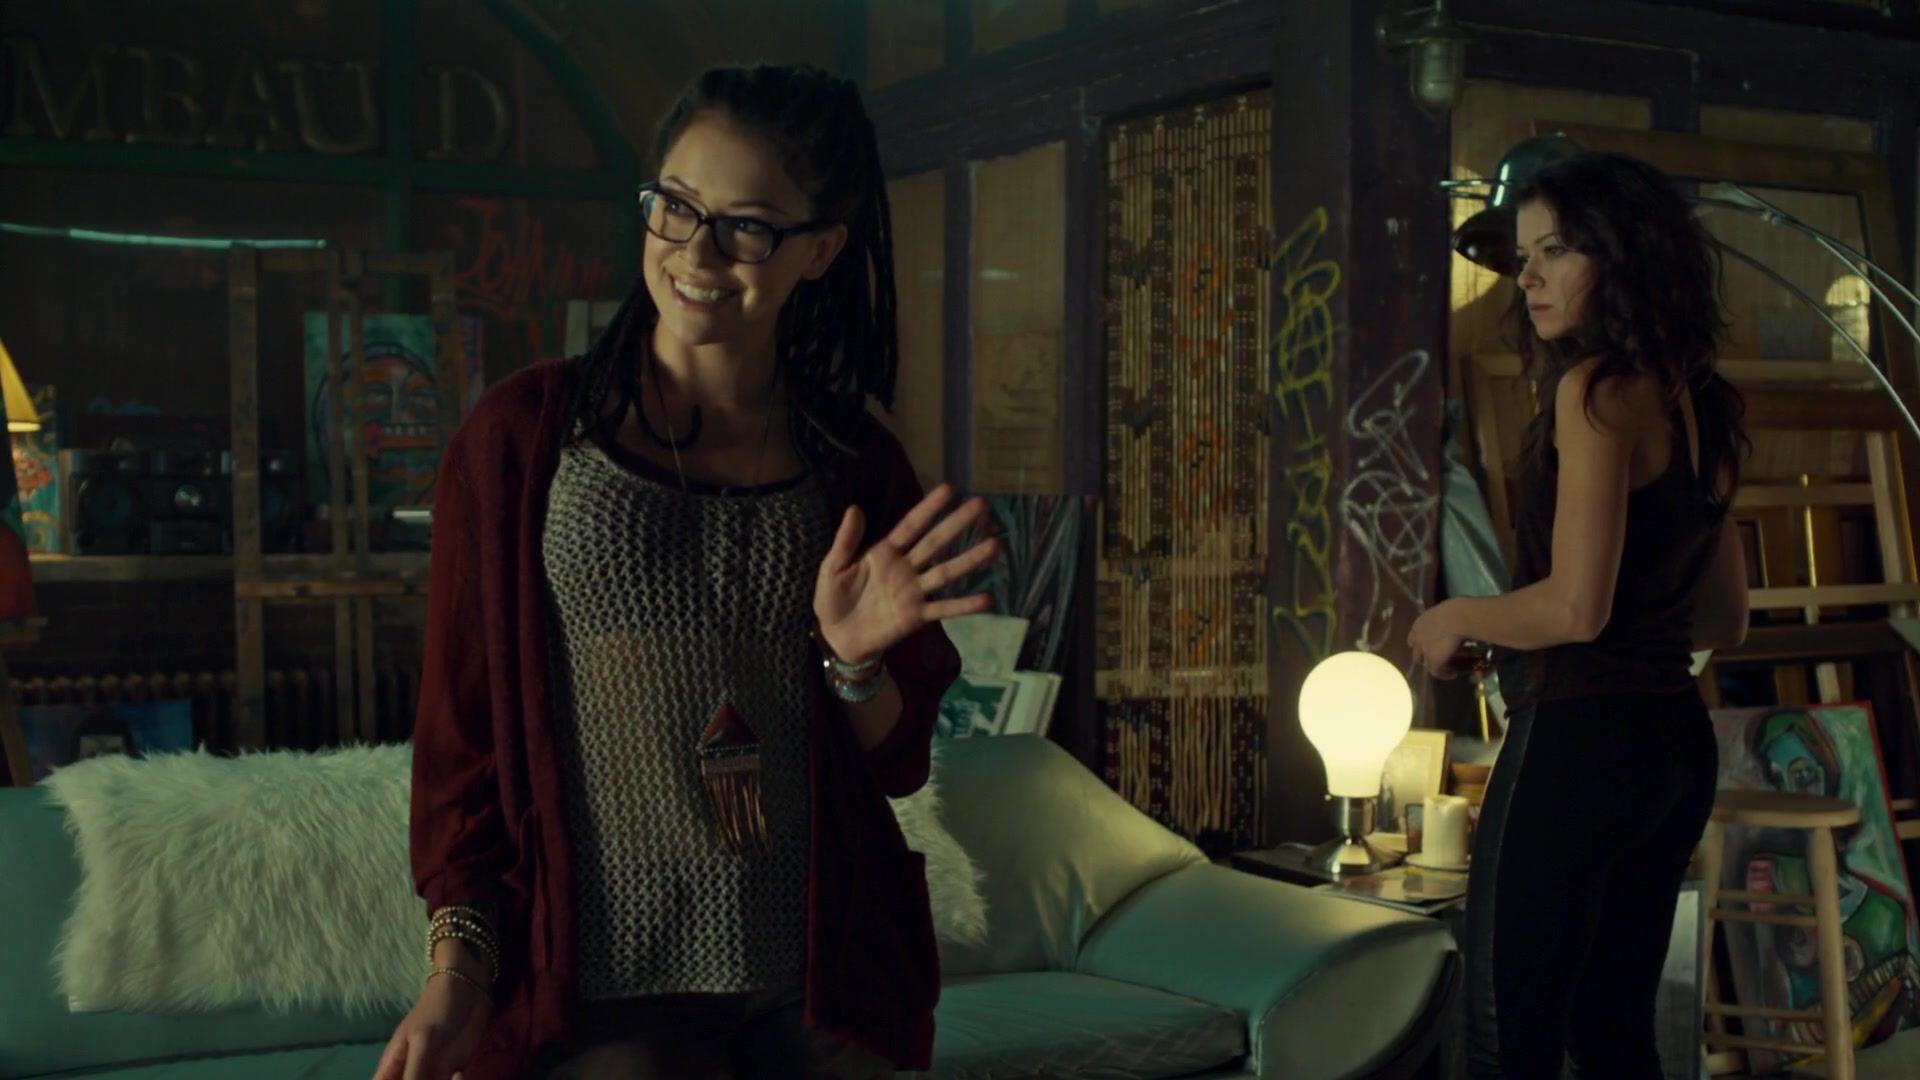 Orphan Black Season 2 expands on the universe, but is the clone